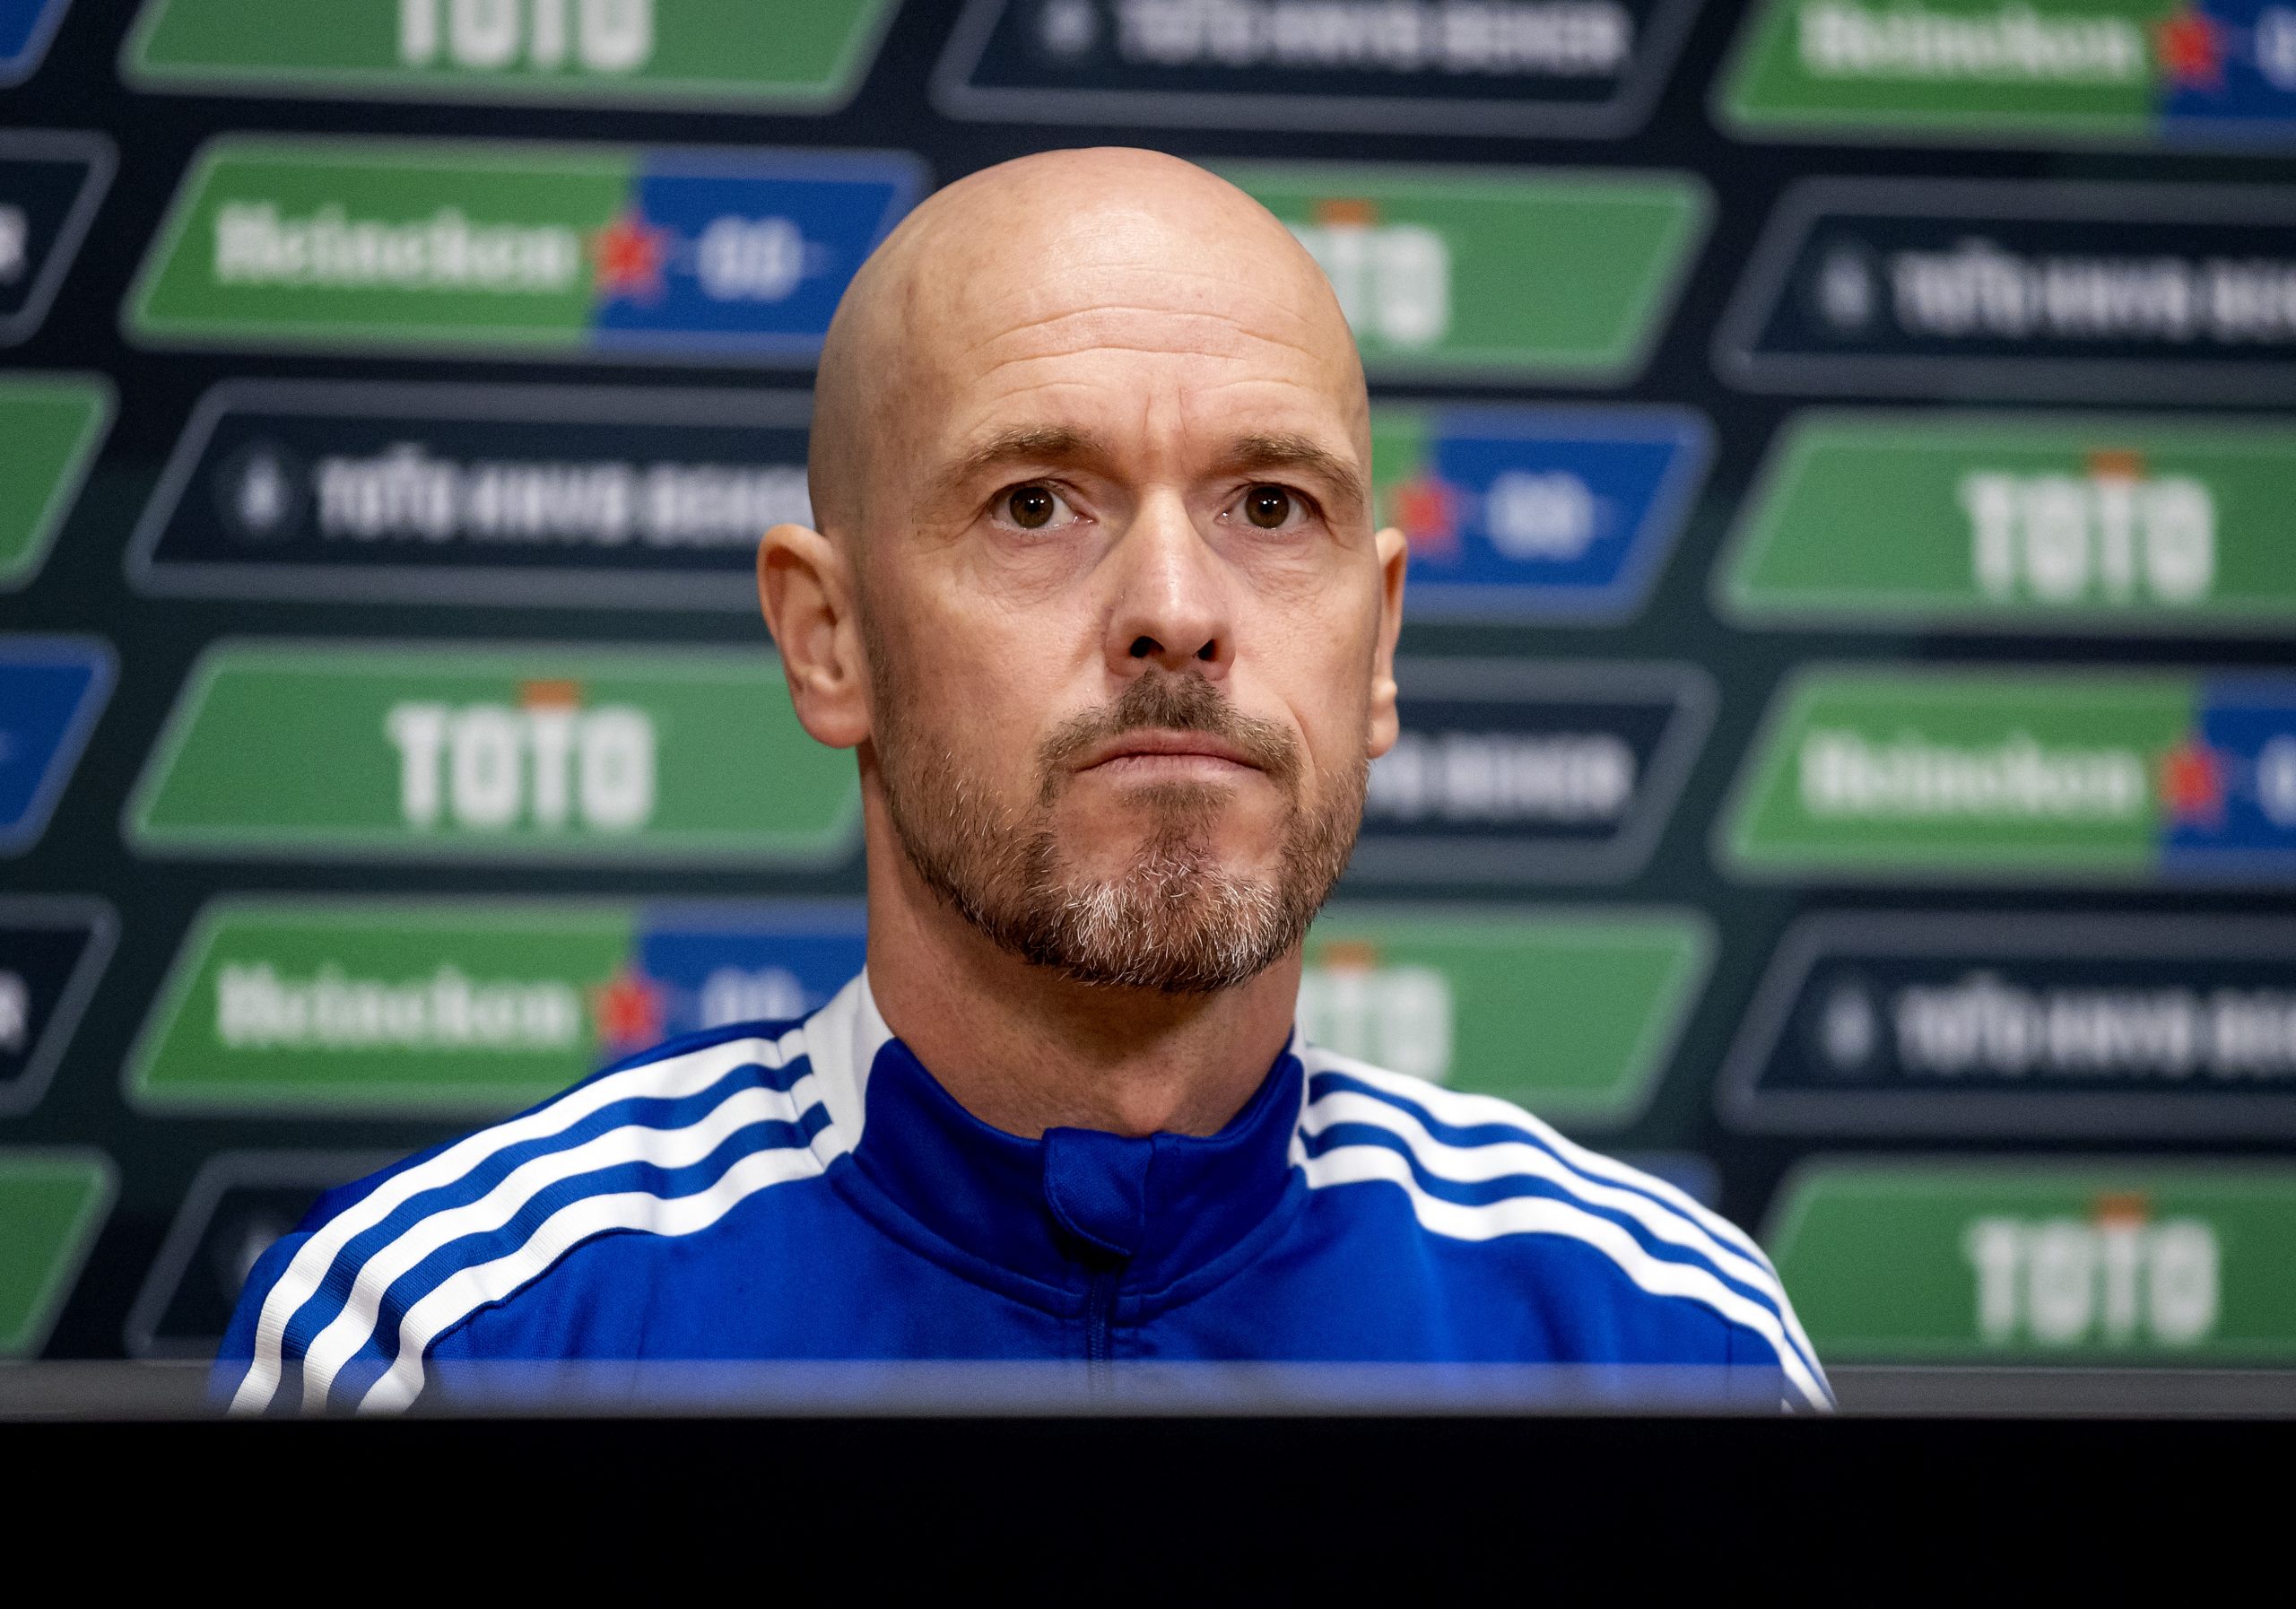 Erik ten Hag: Manchester United appoint Ajax boss as new manager